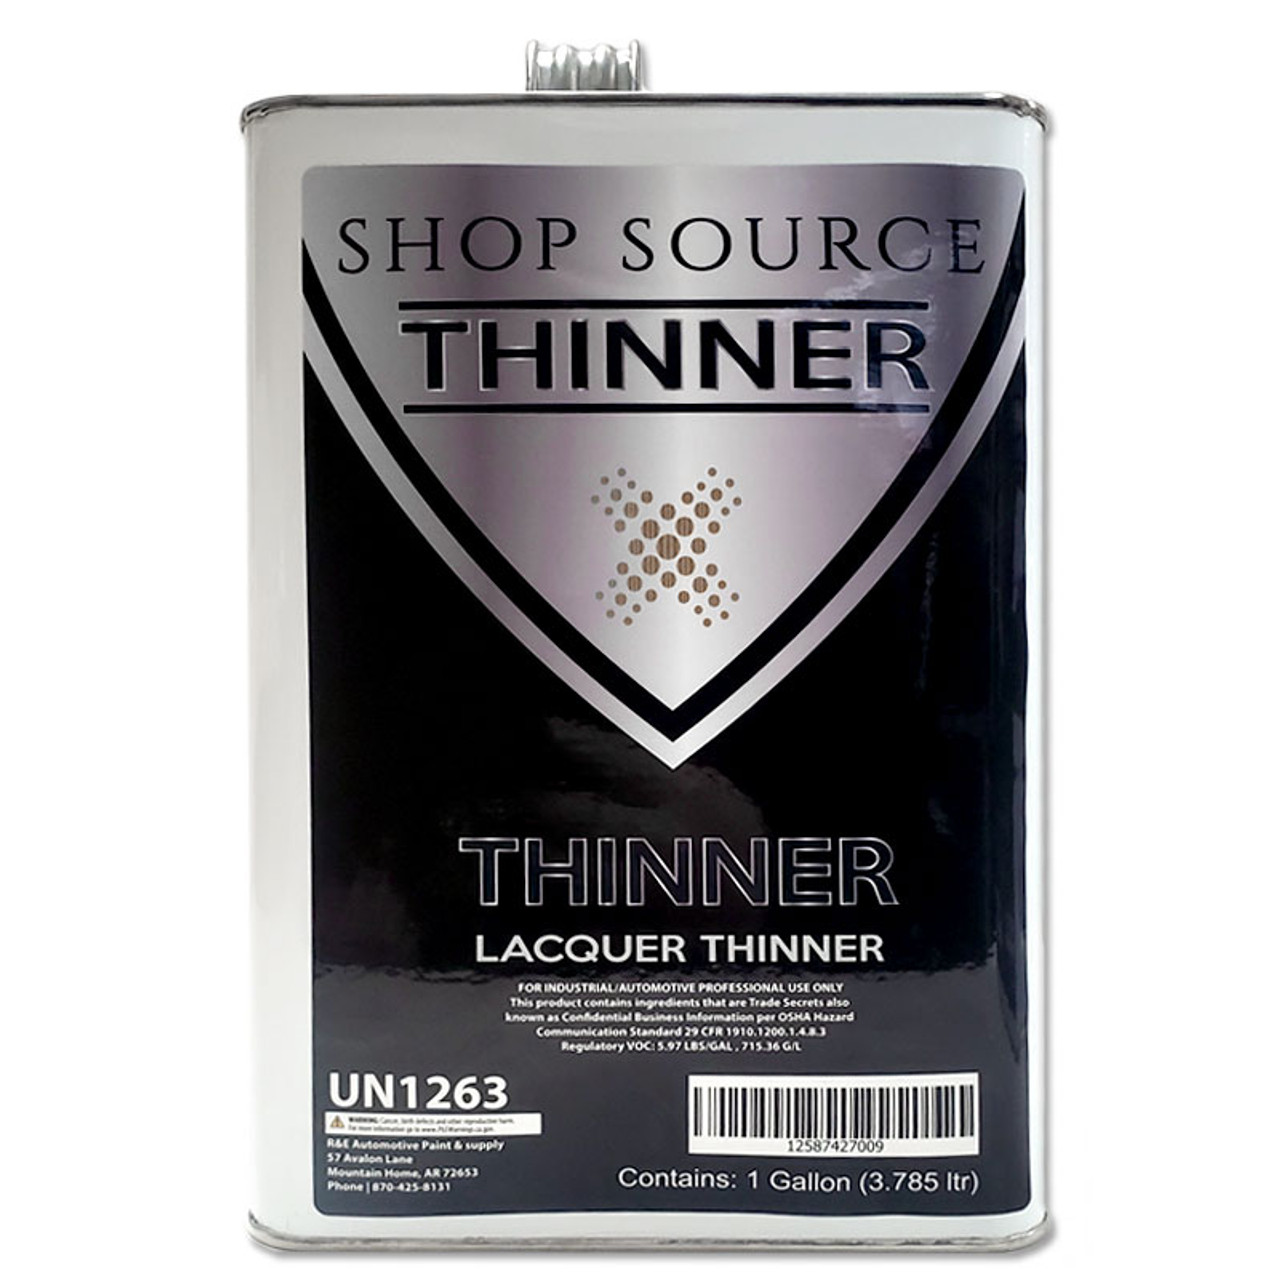 SS Thinner, Lacquer Thinner, Gallon